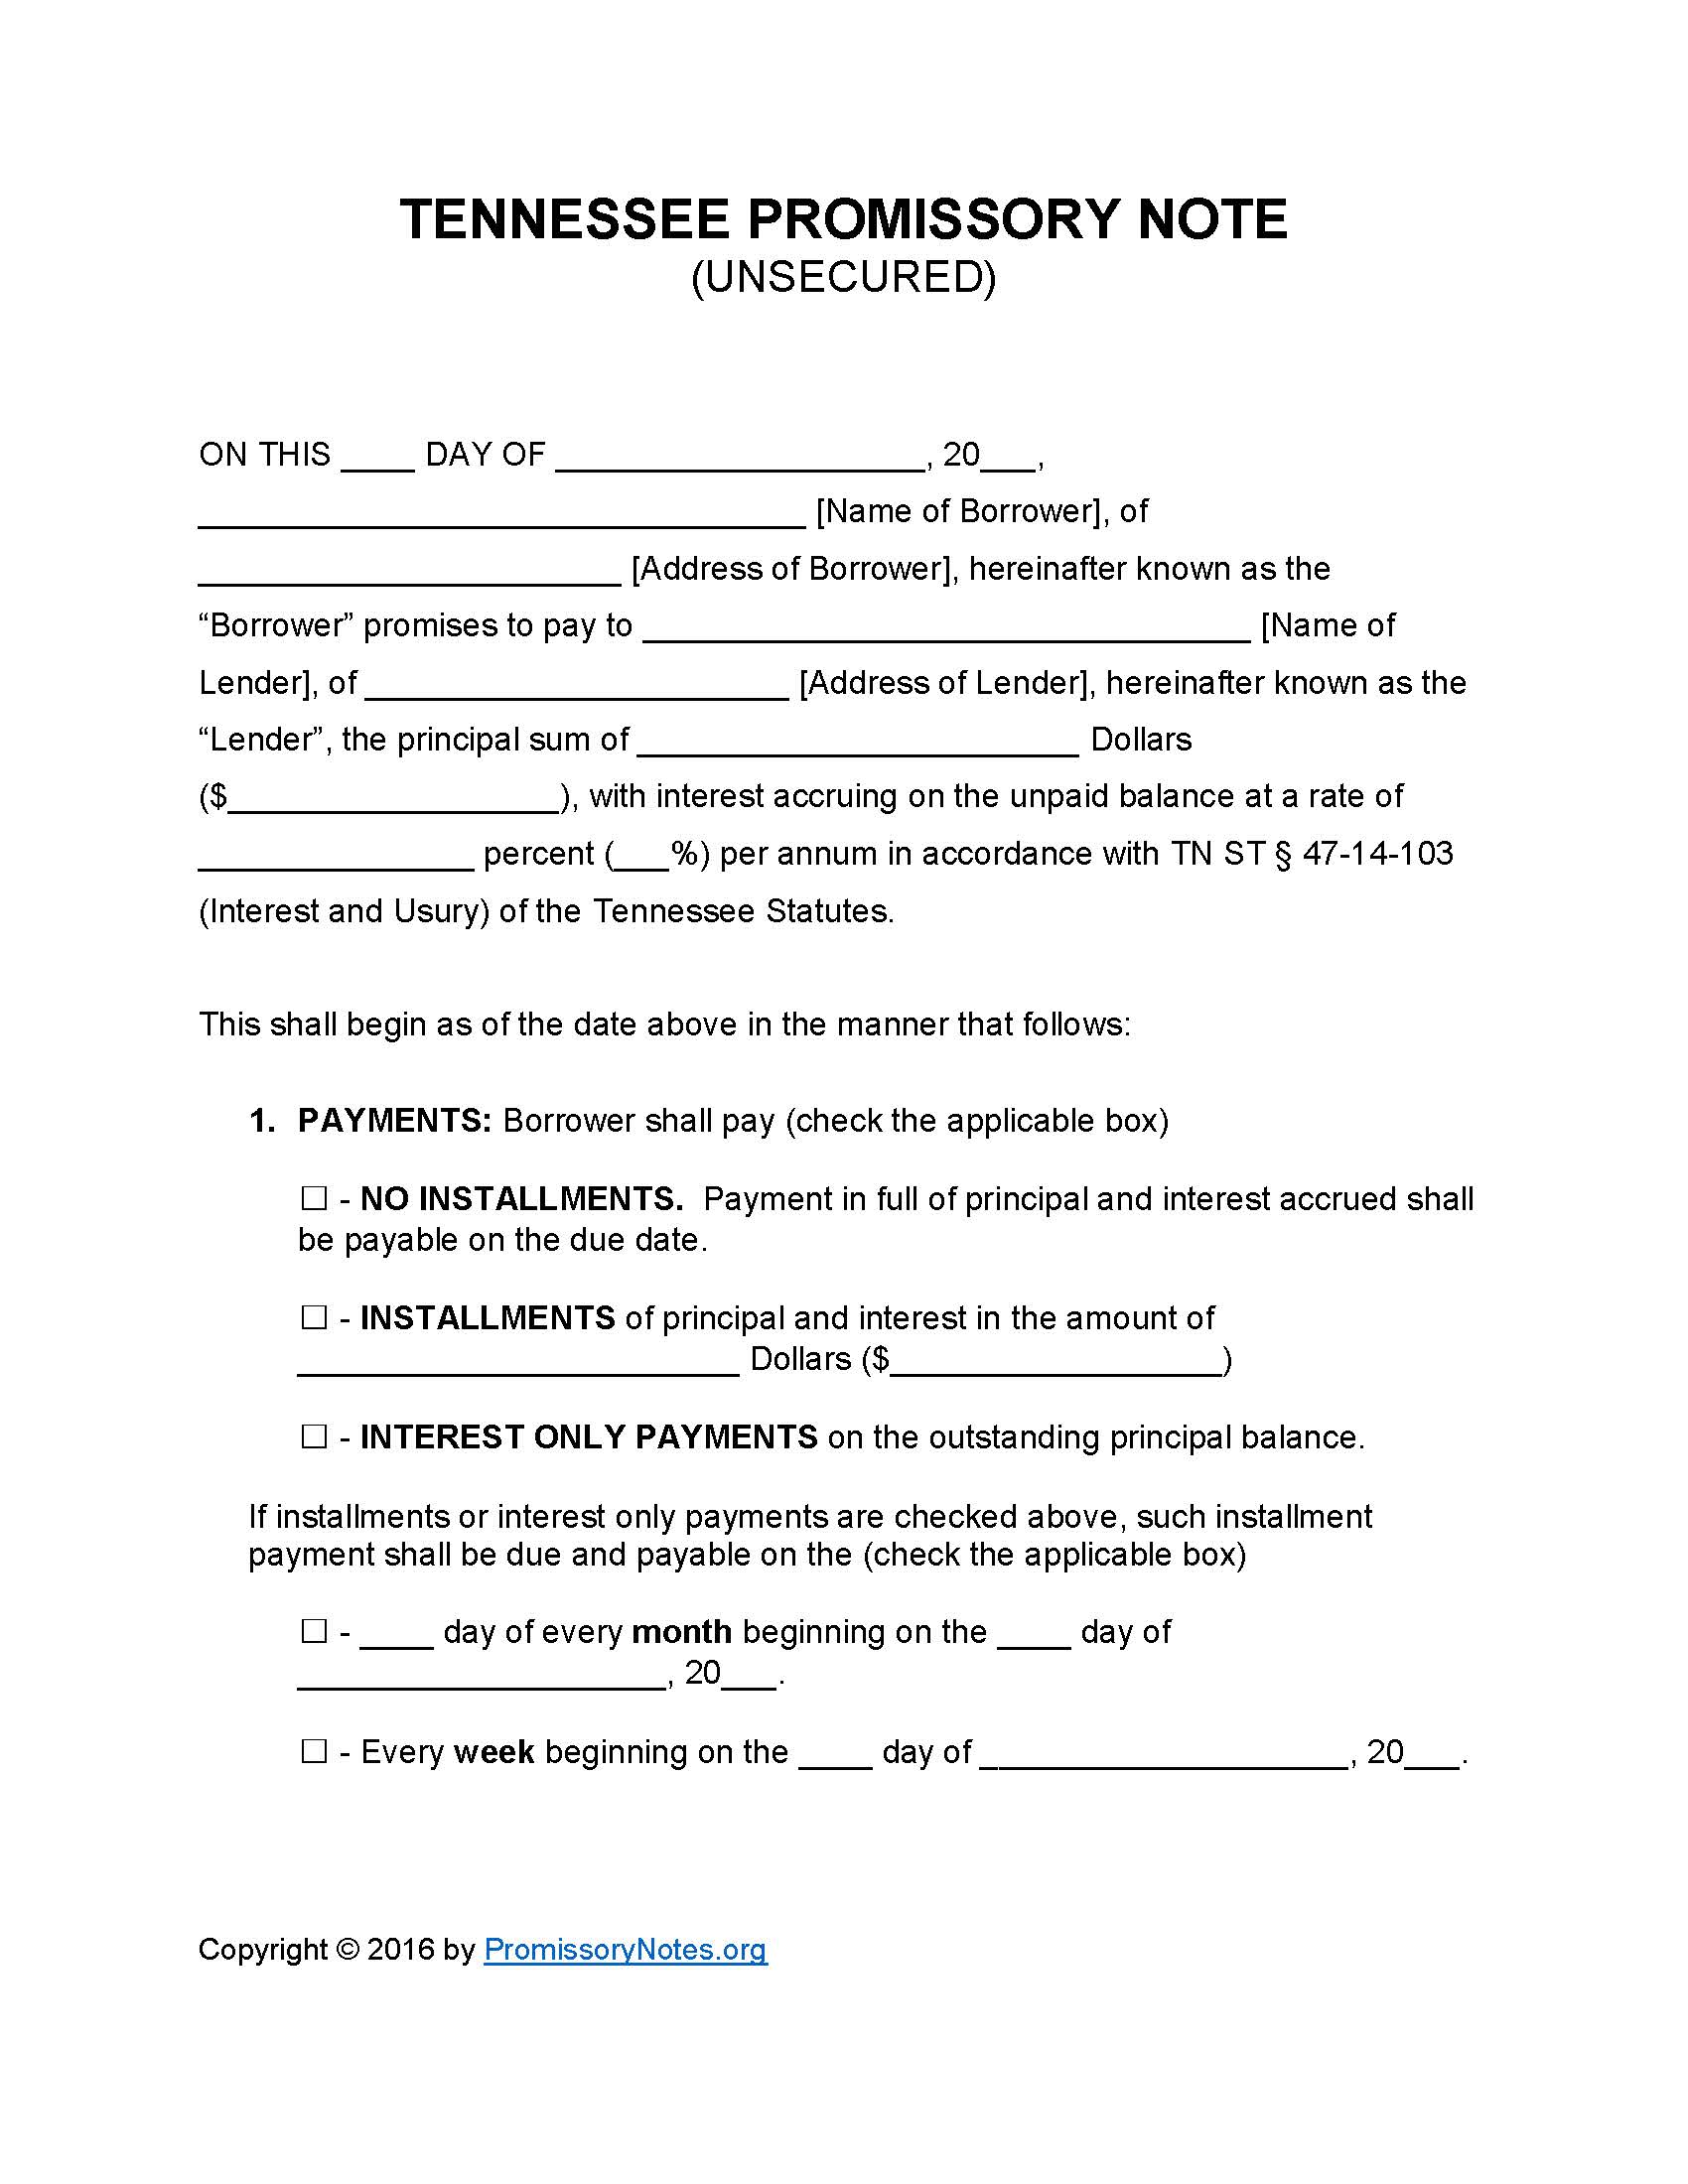 tennessee-unsecured-promissory-note-form